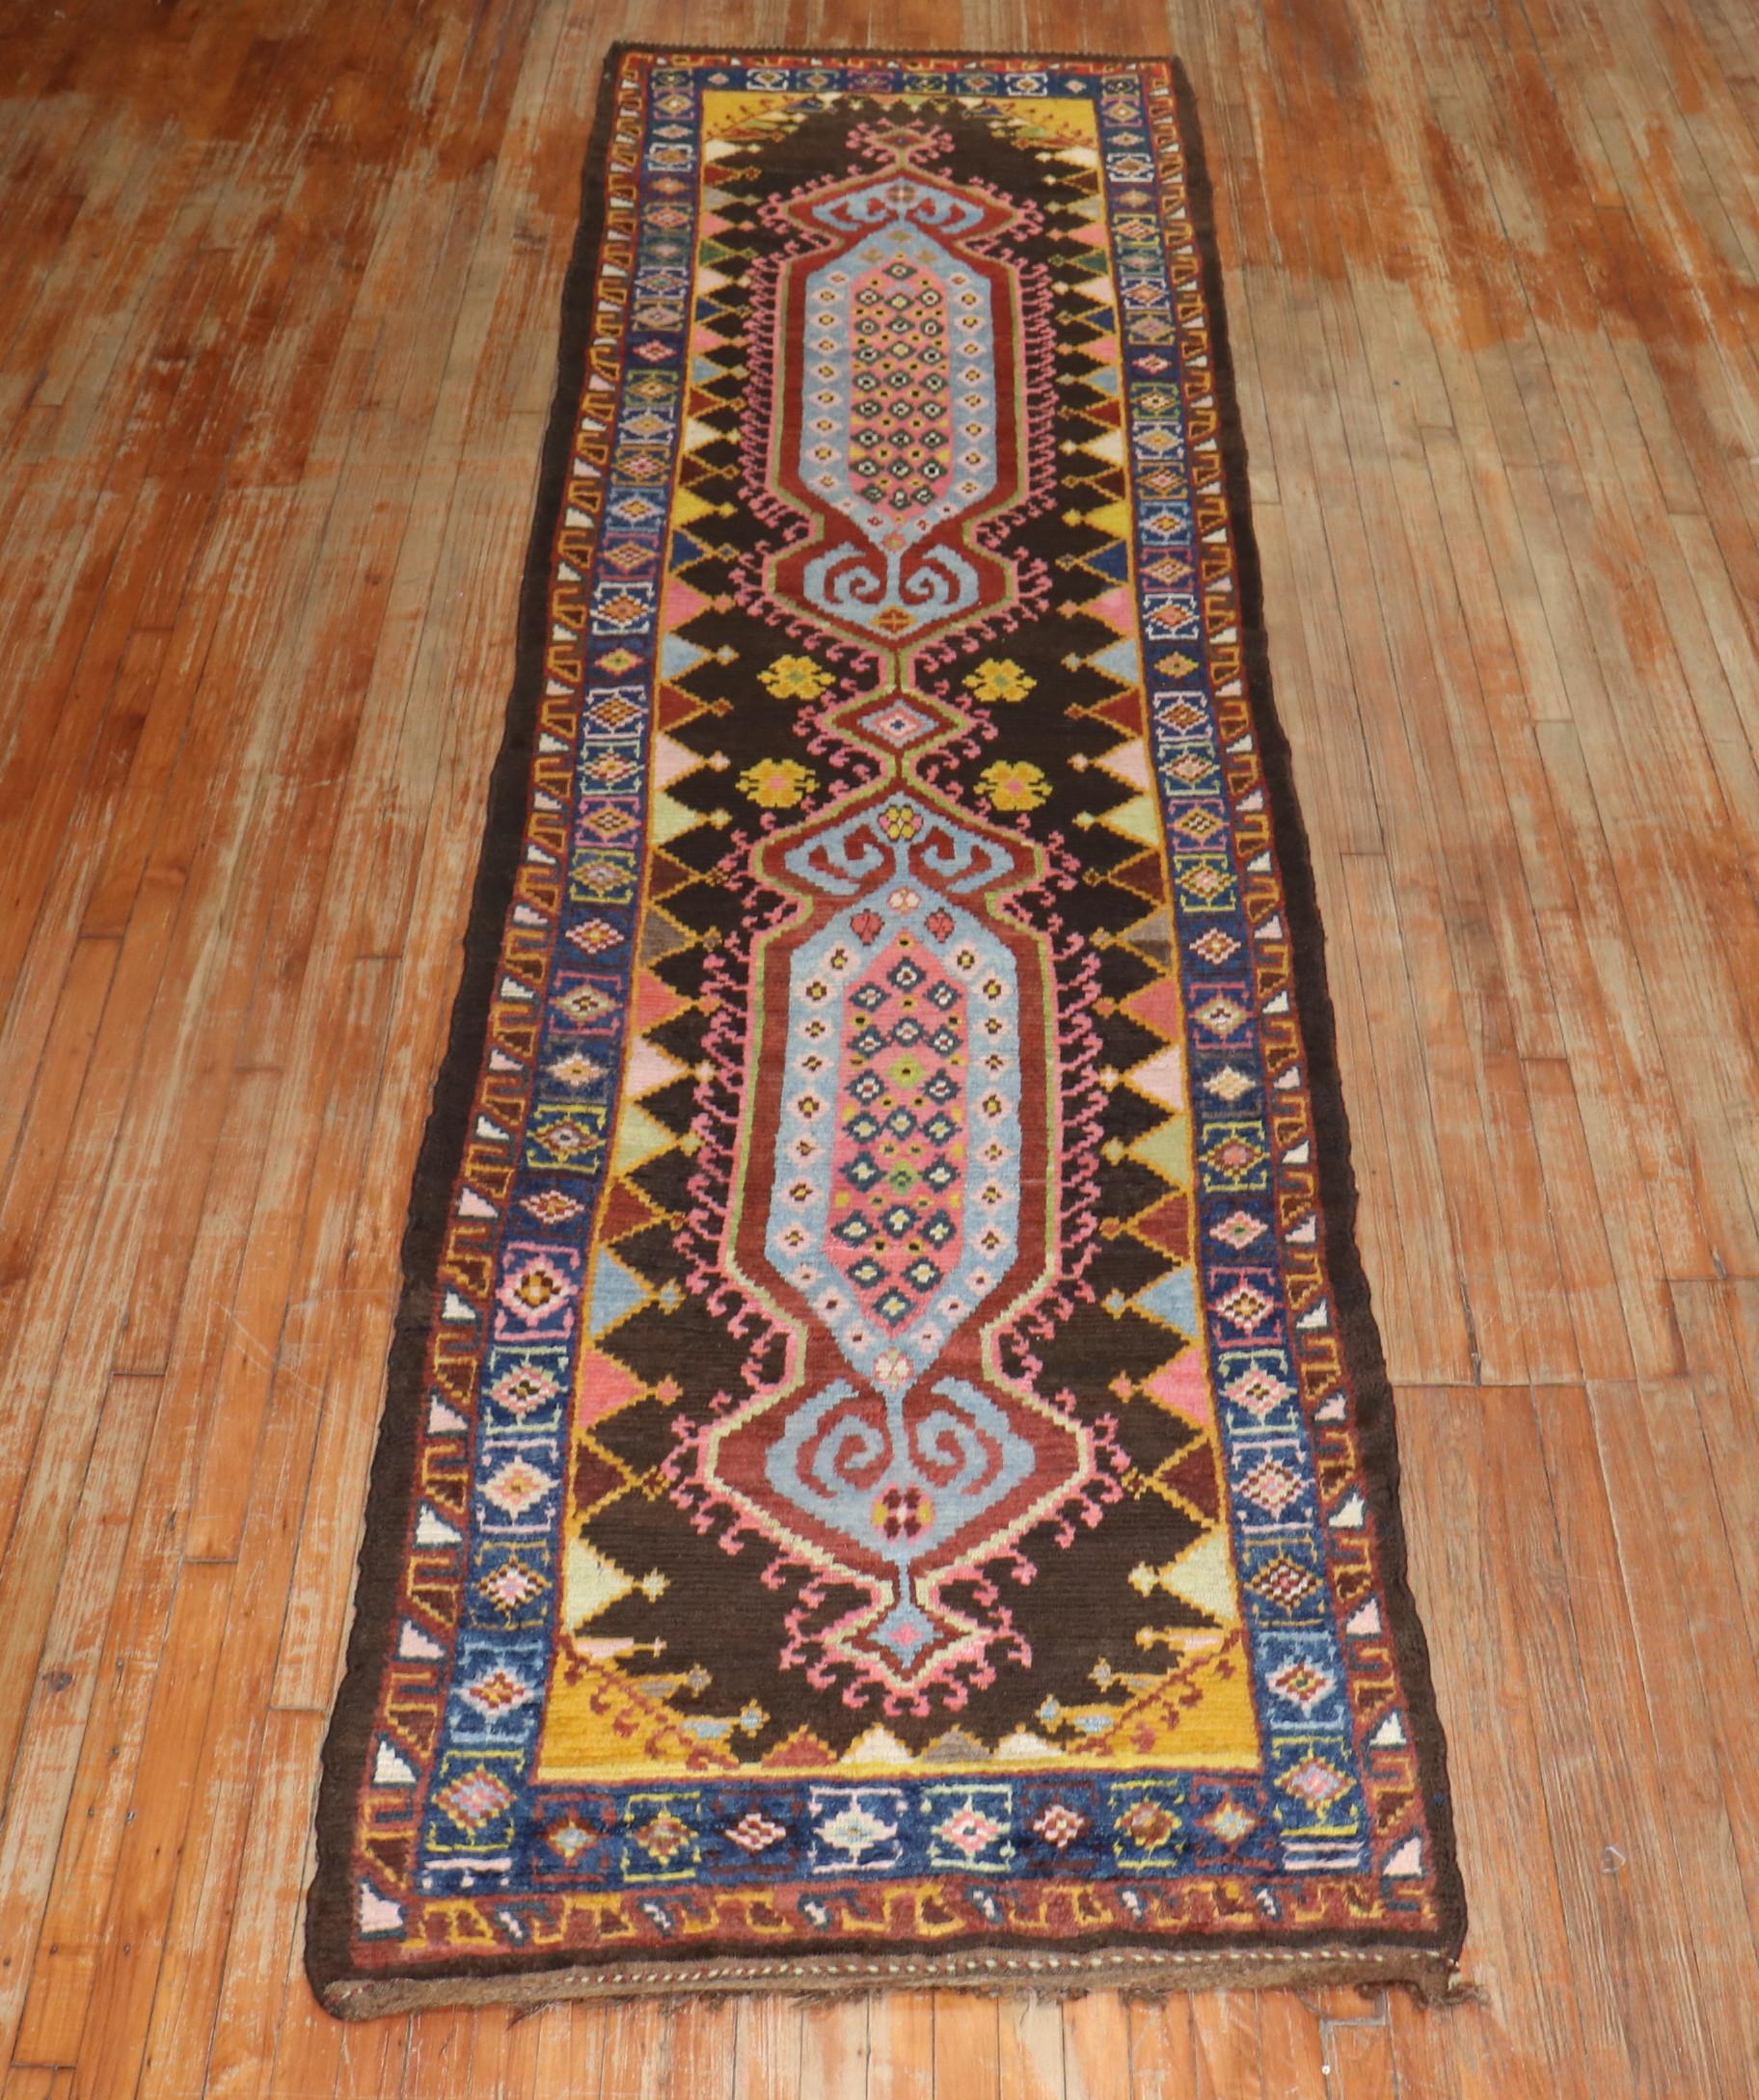 An early 20th century Persian Gabbeh rare size runner originating from the JP WILLBORG collection in Europe

Measures: 3'5'' x 13'2''.